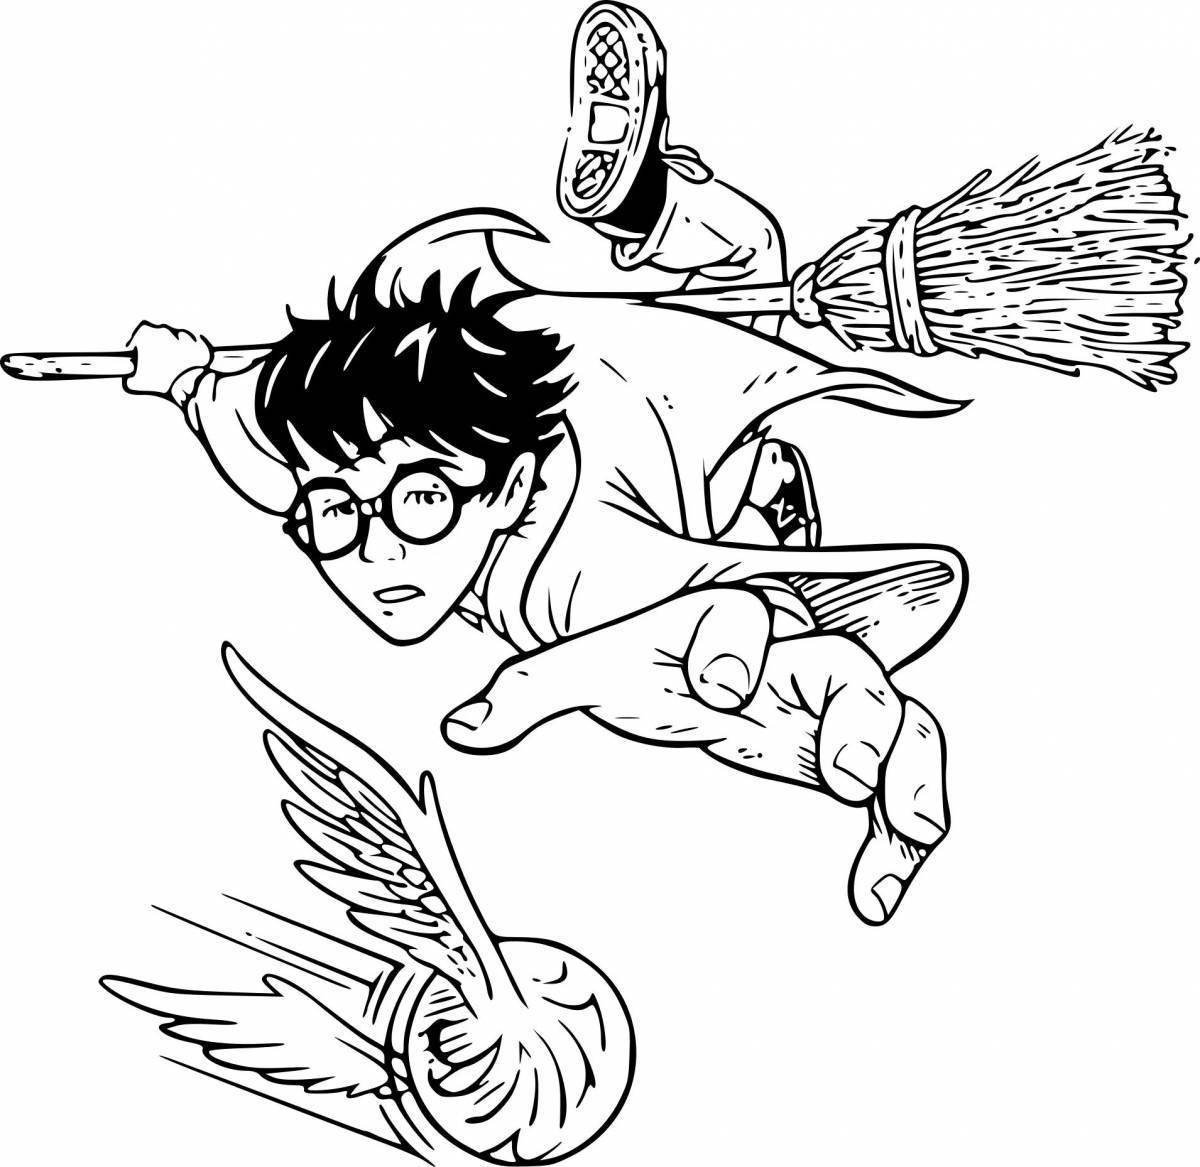 Charming harry potter coloring page